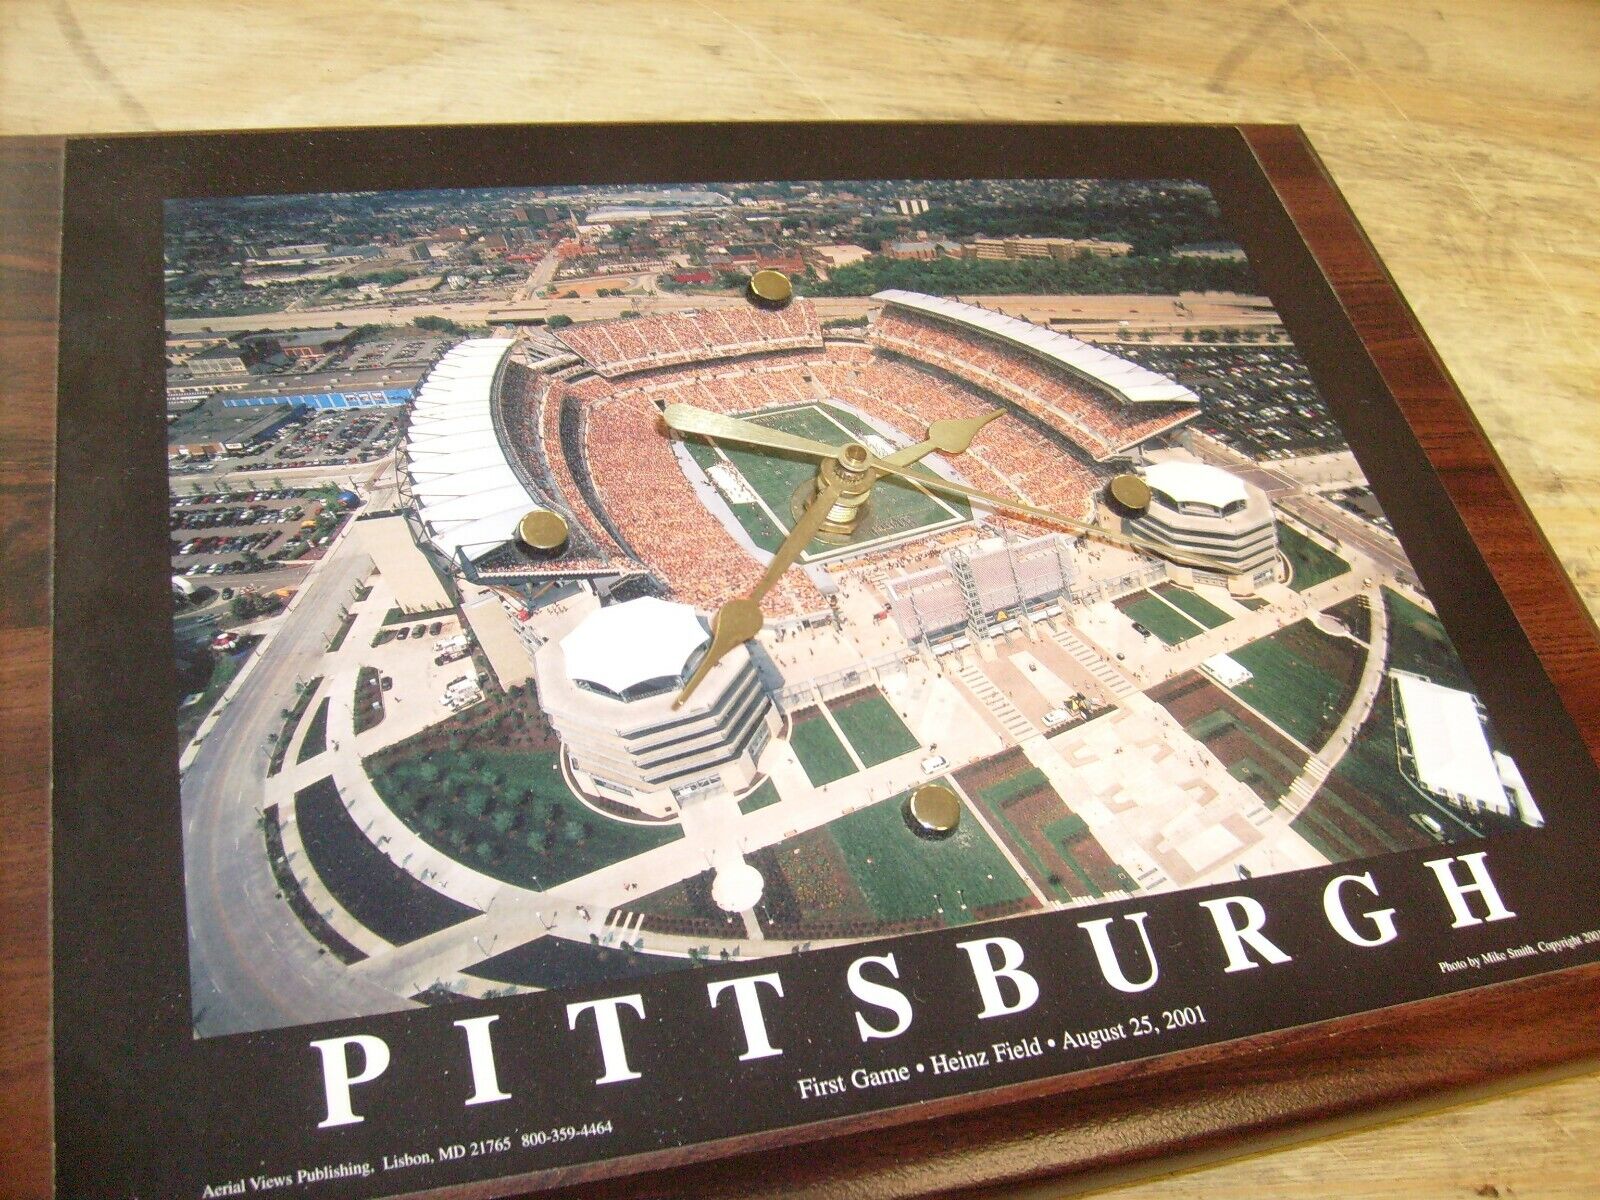 CLOCK - FIRST FOOTBALL GAME AT HEINZ FIELD,STADIUM~PITTSBURGH,PA AUGUST 25,2001 